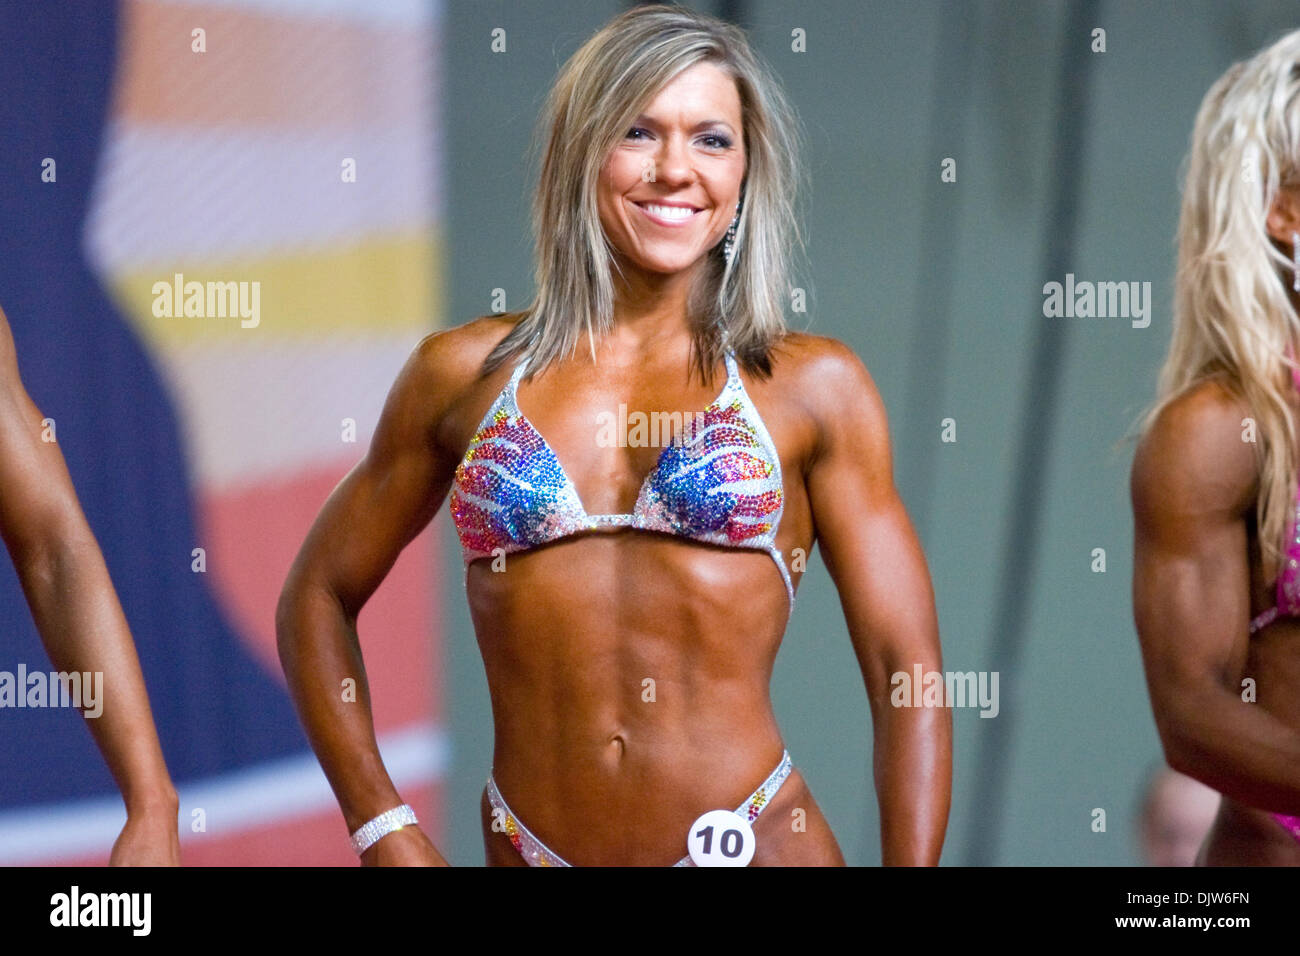 06 March 2010 (10) Nicole Cavalcanti competes in the 2010 Arnold Amateur IFBB Championships held at the Greater Columbus Convention Center in Columbus, Ohio Adult Picture